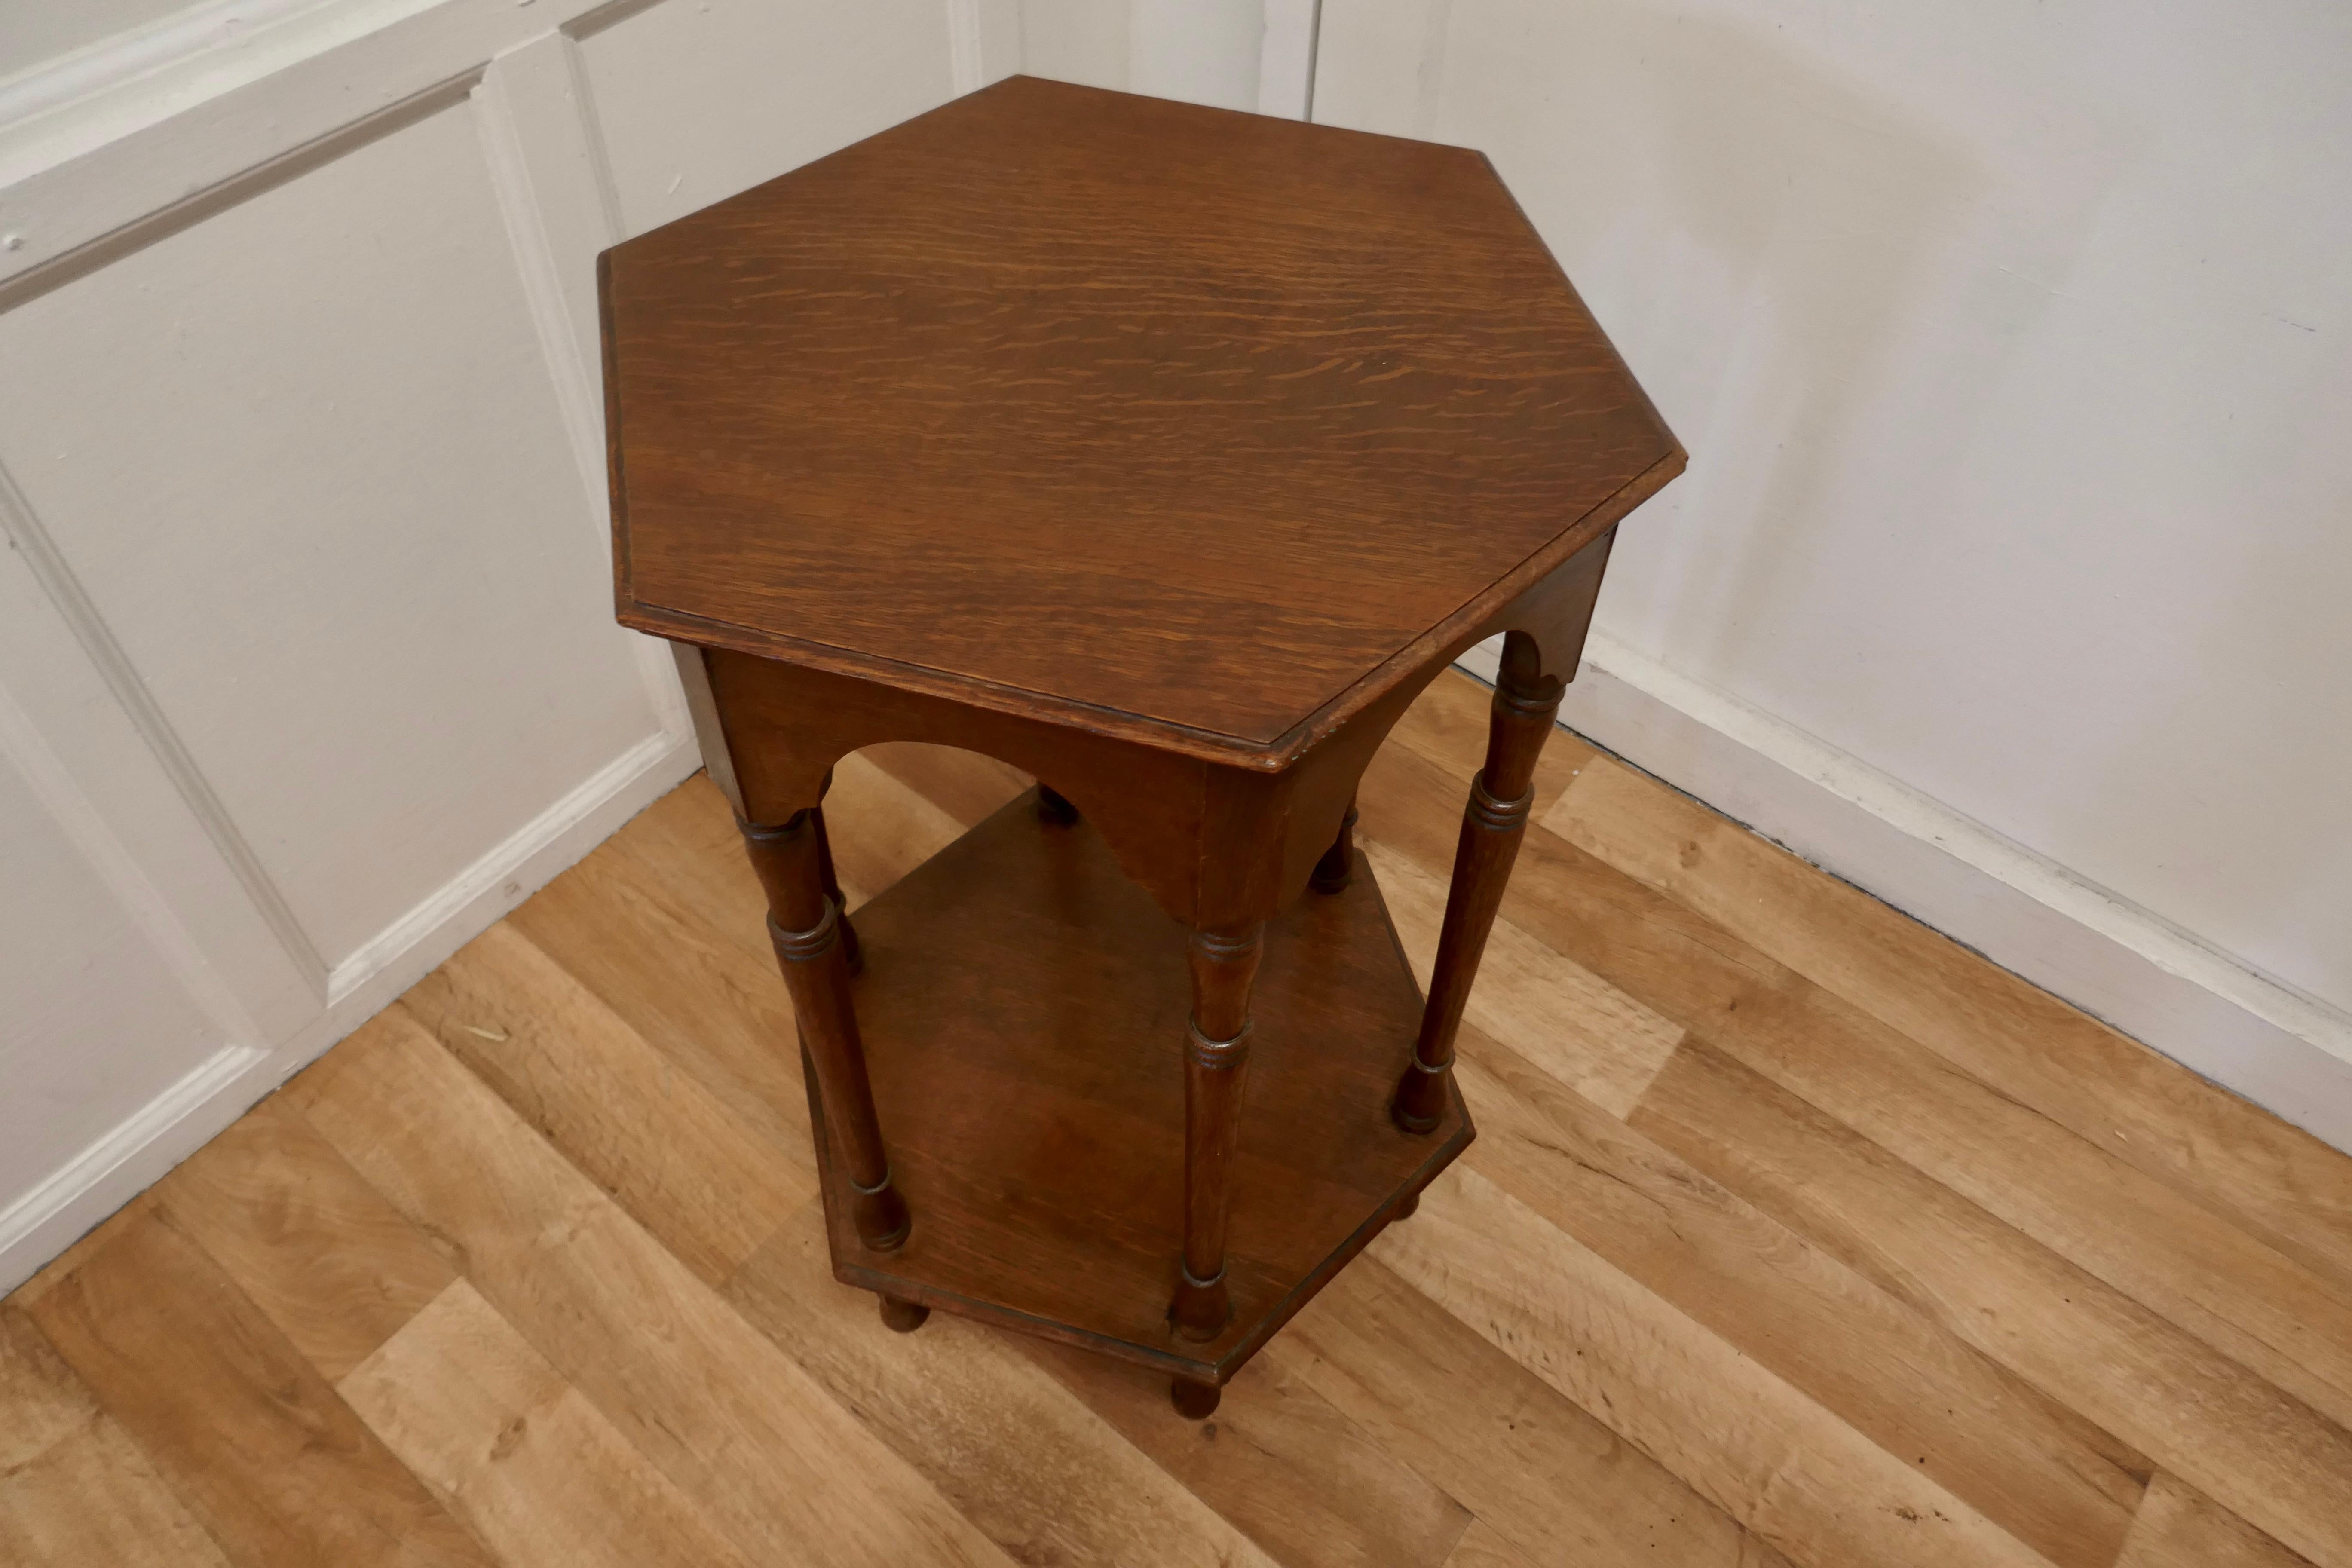 Arts & Crafts golden oak occasional table

This is a pretty and useful piece, the table stands on an undertier supported by turned legs in a tradition Arts and Crafts style 
The table is in good condition it is 29” high, and 18” x 21”in diameter